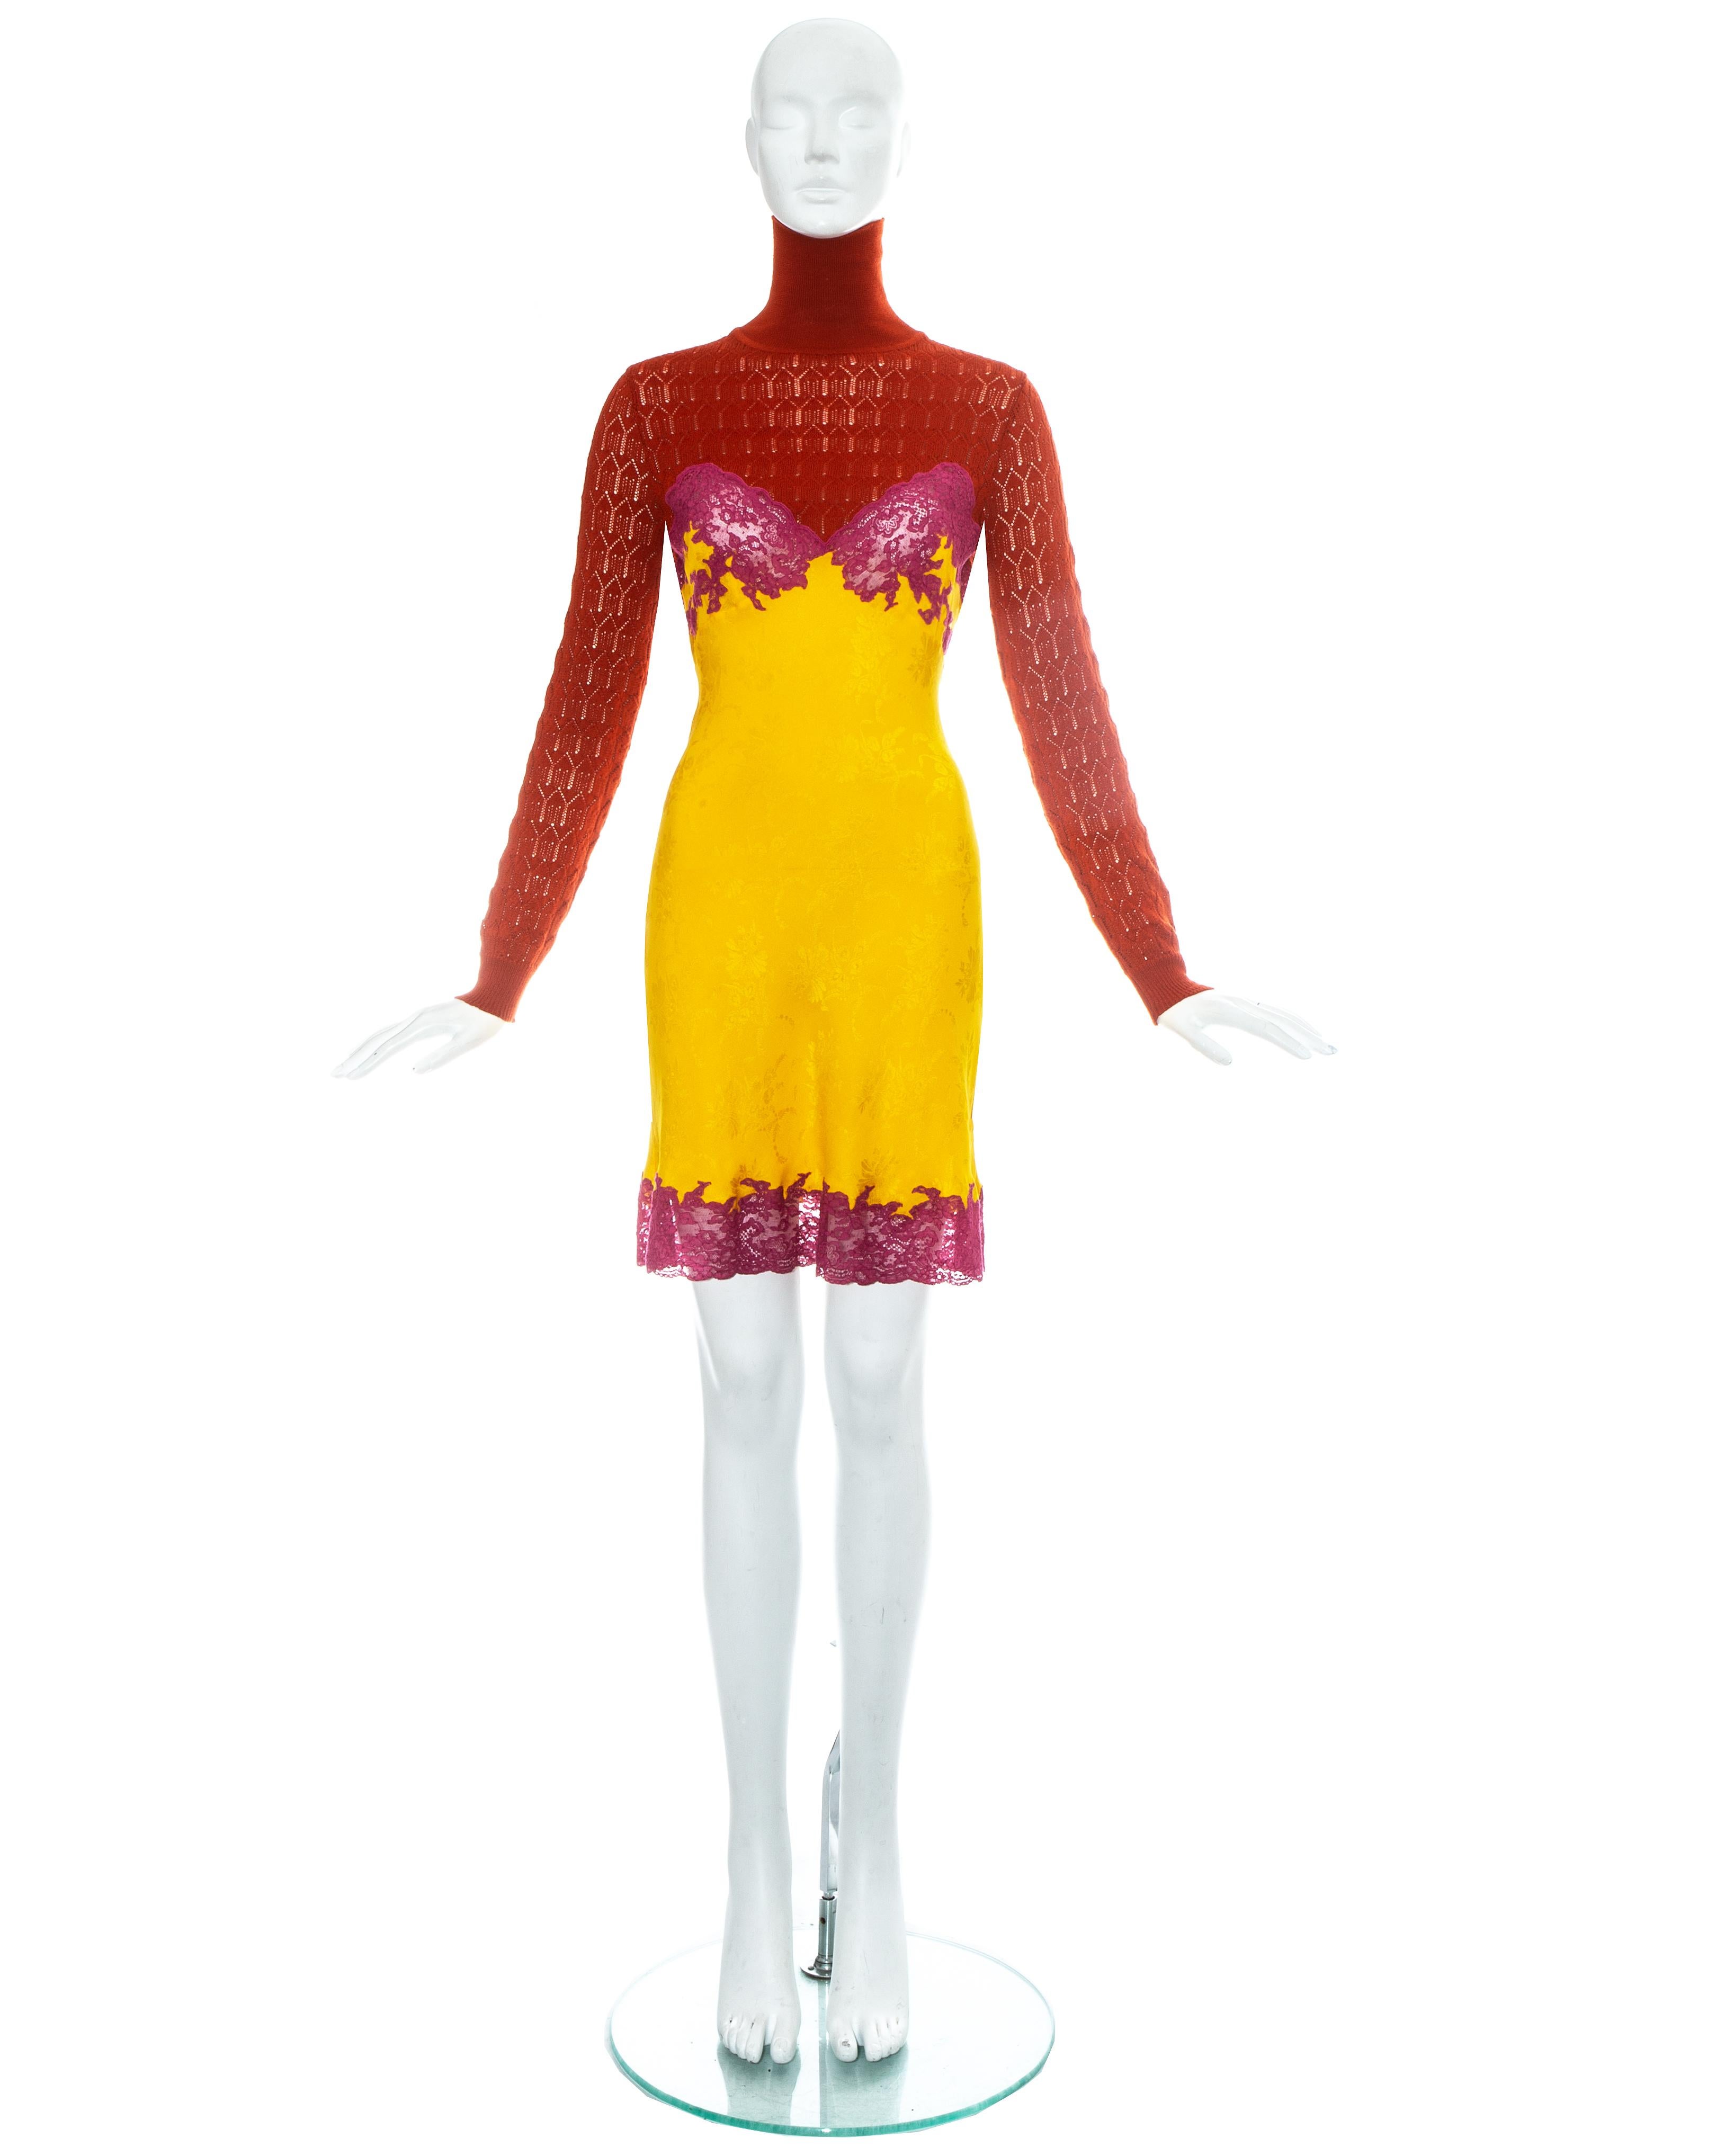 Christian Dior by John Galliano; lingerie inspired evening dress with red crochet knit turtle neck sweater and yellow silk dress with hot pink lace inserts.

Fall-Winter 1998